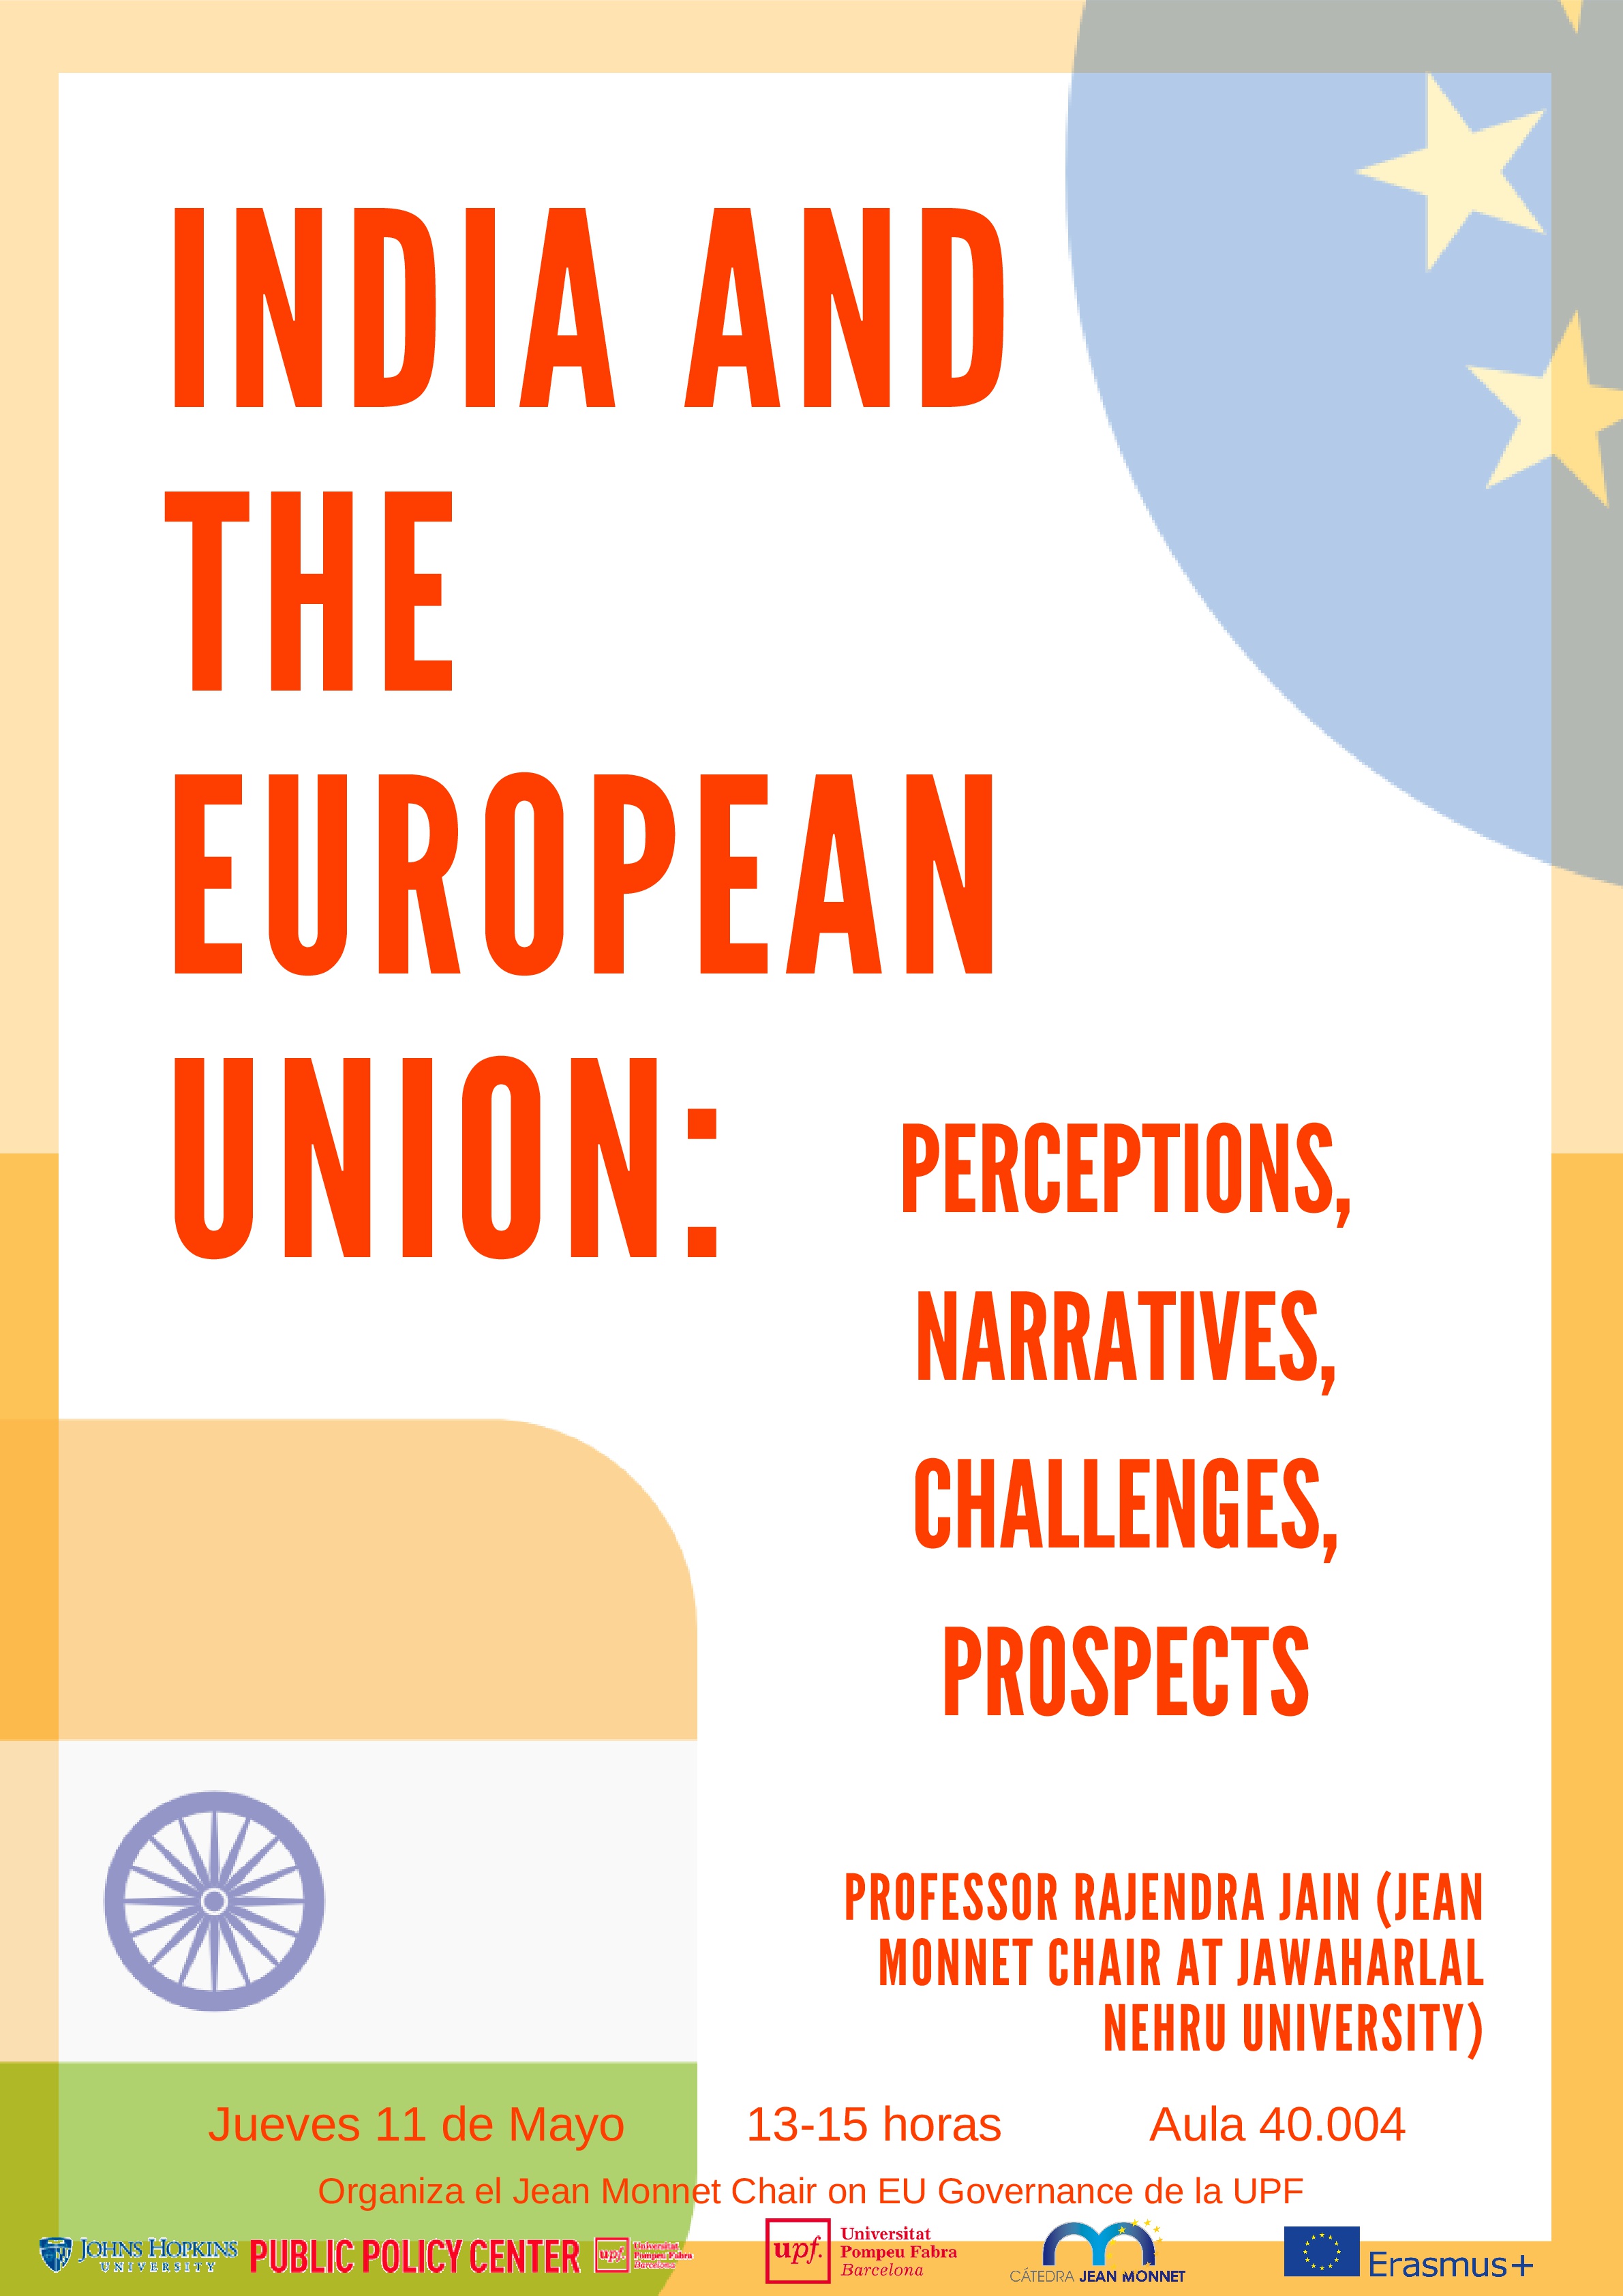 11/05/2017 India and the European Union: perceptions, narratives, challenges, prospects